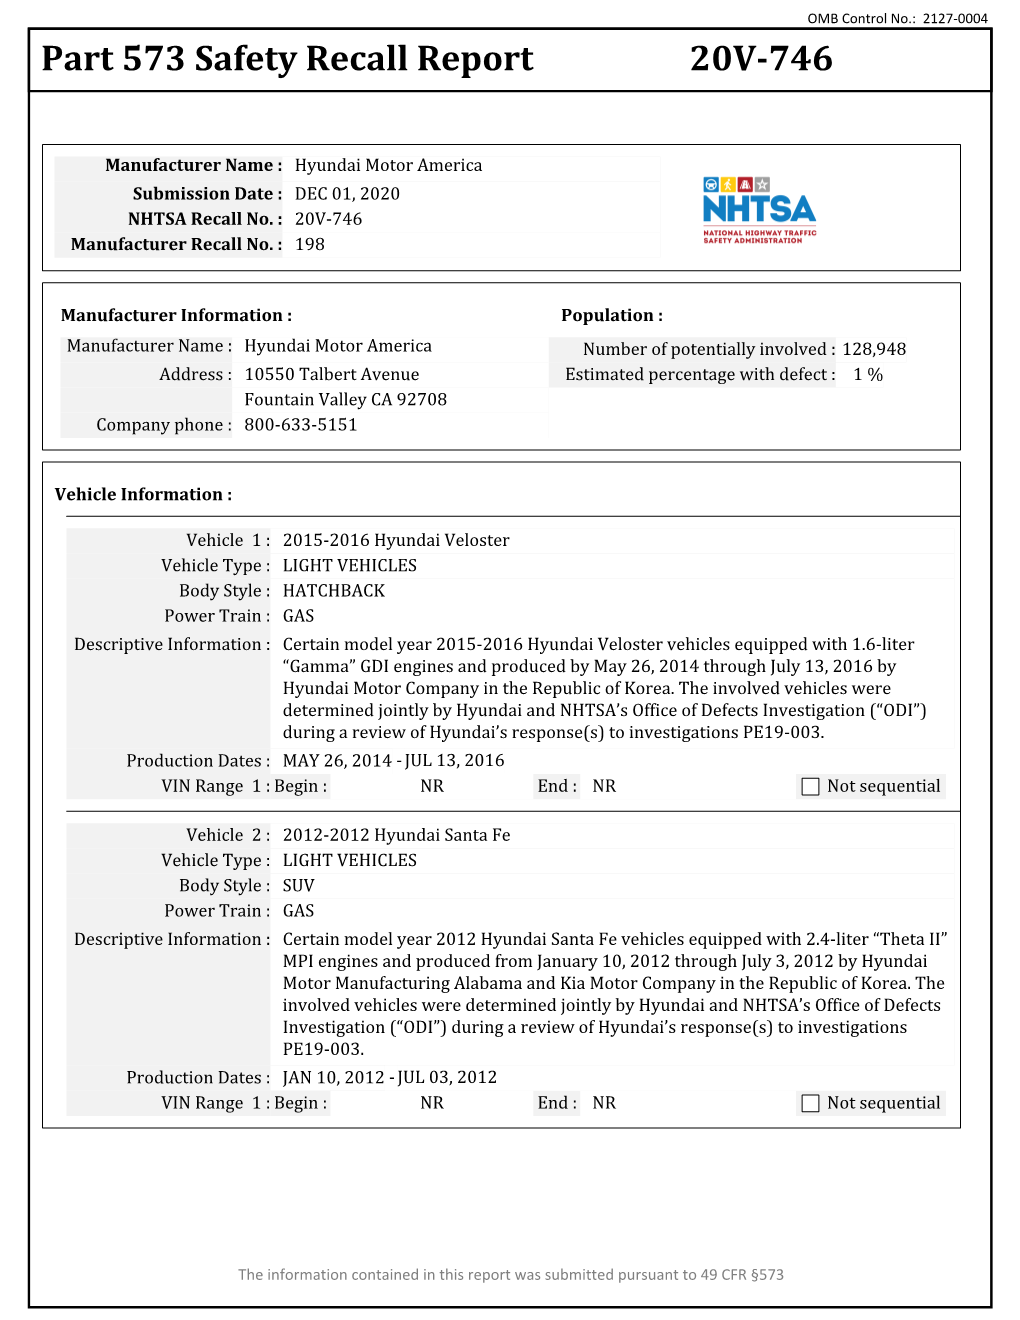 Part 573 Safety Recall Report 20V-746